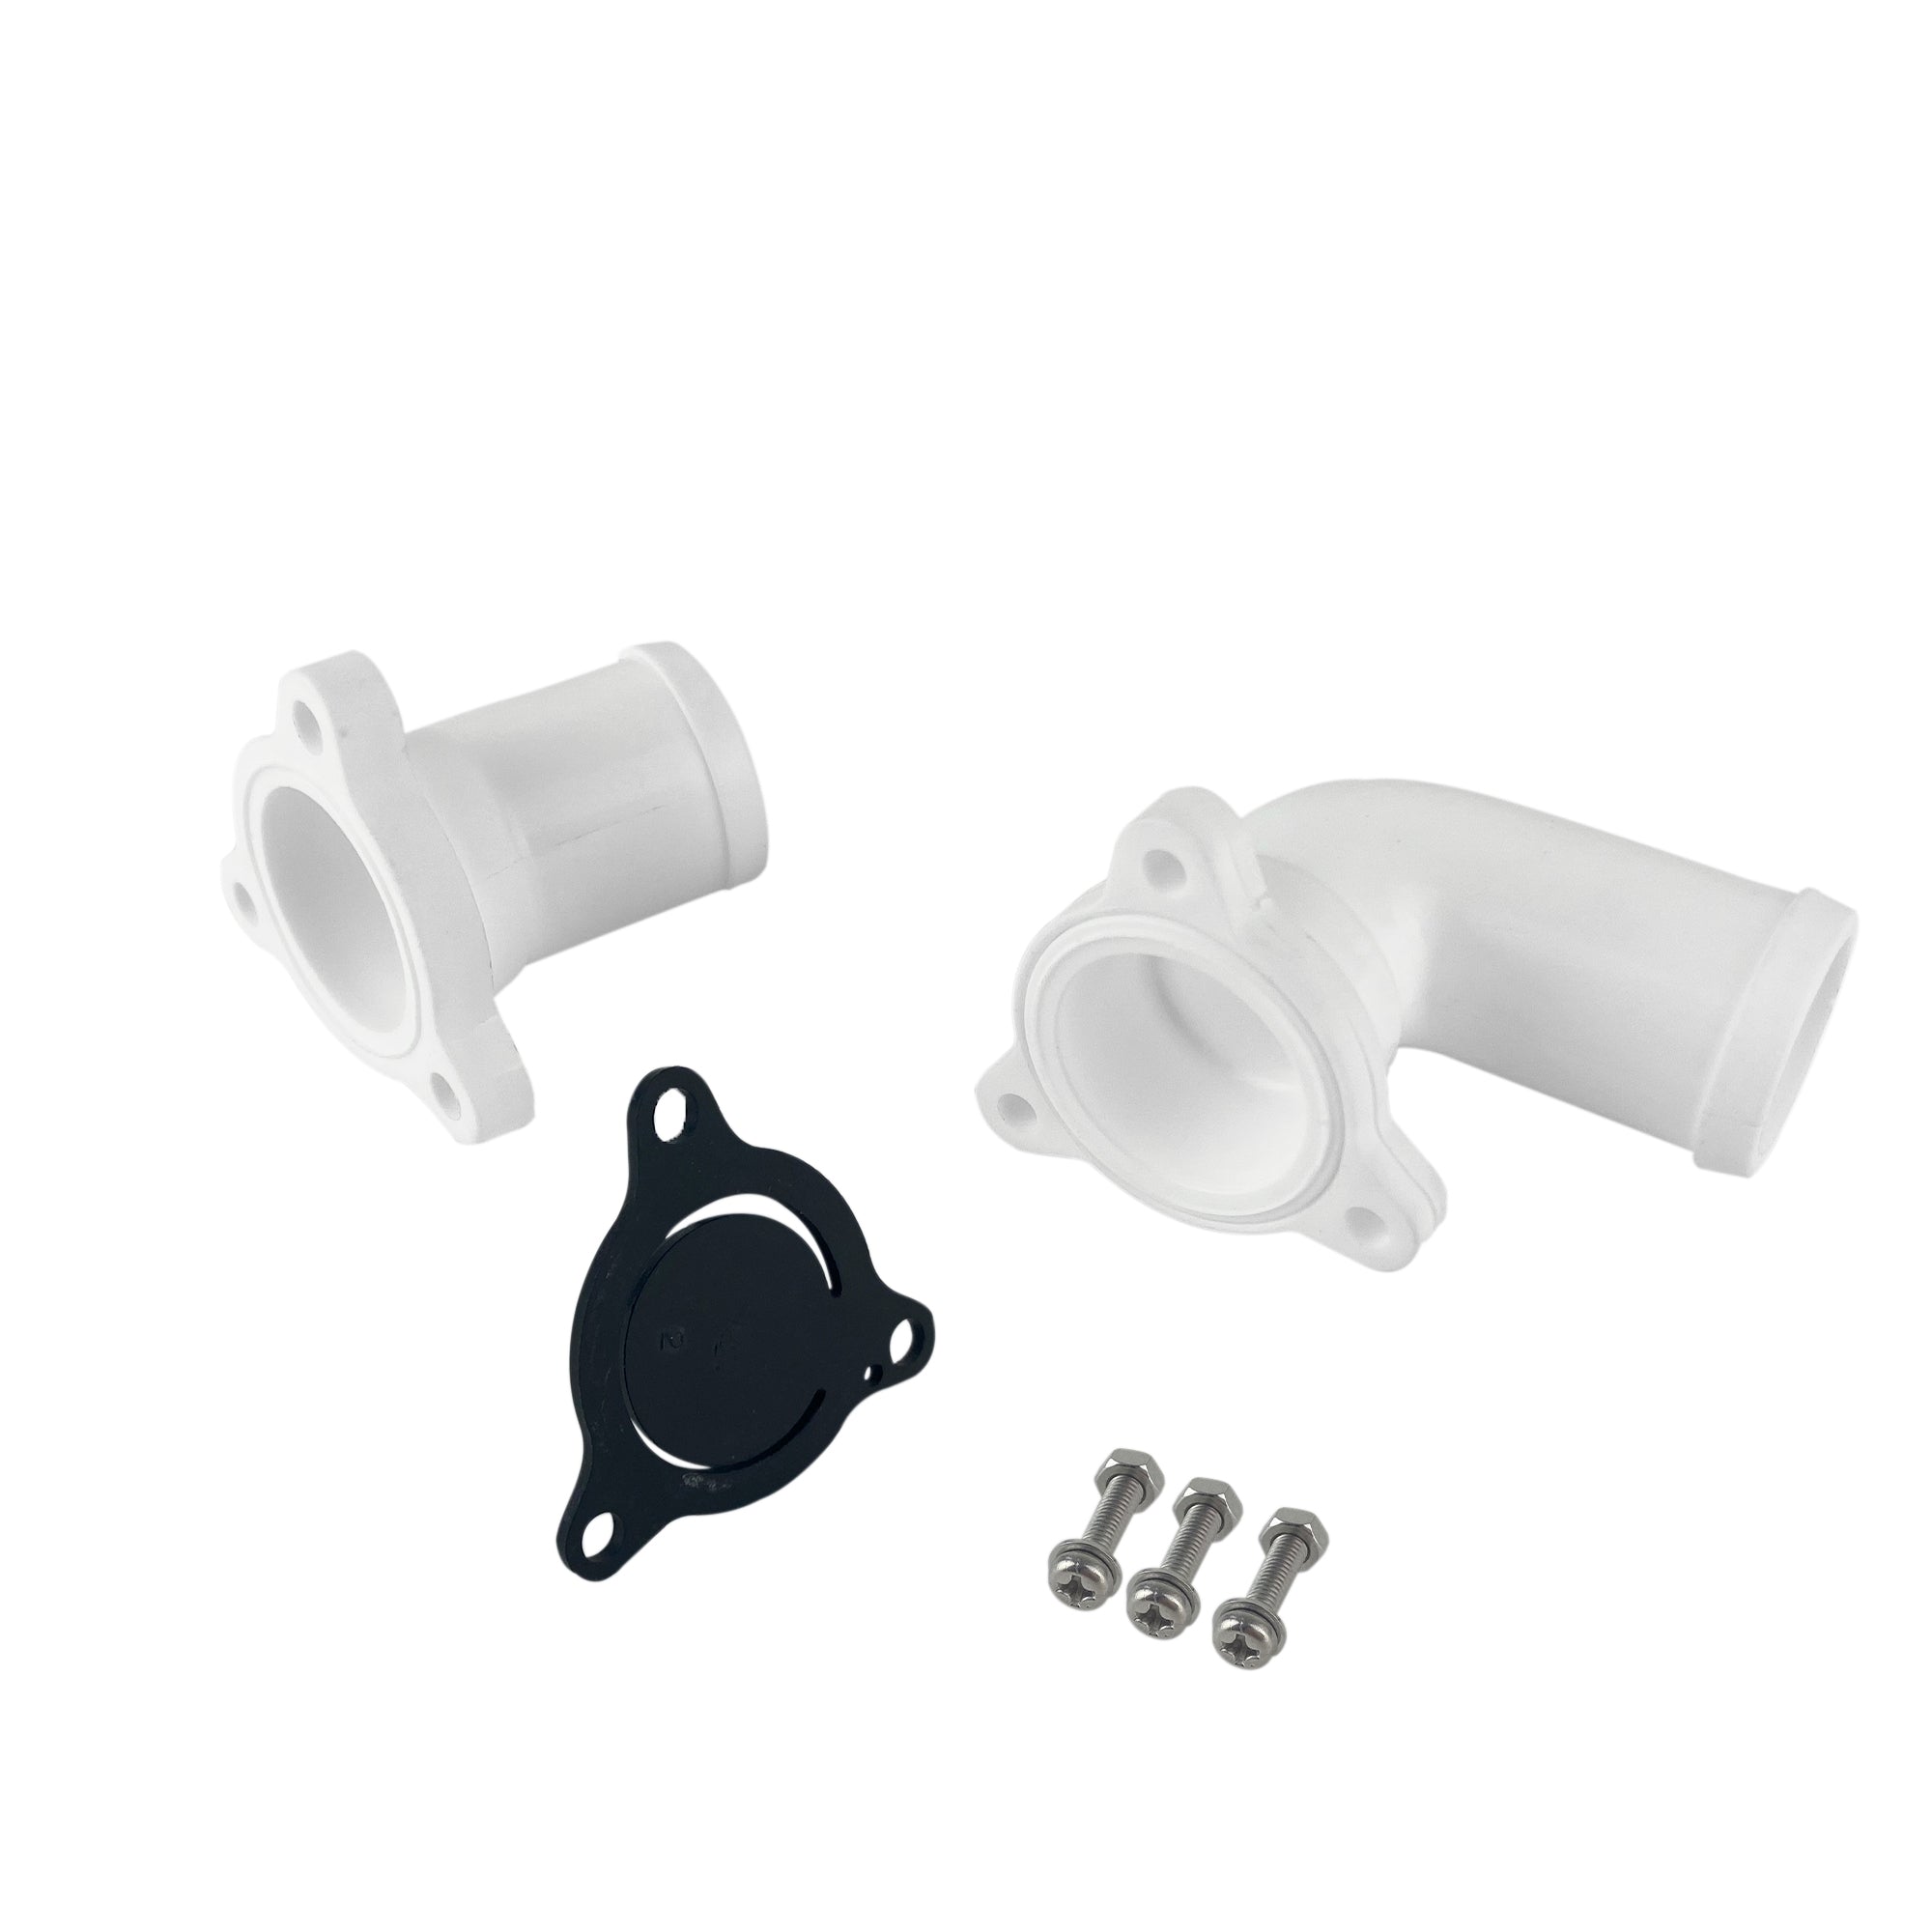 Replacement Flapper Valve and Outlet Port Kit - FO4341